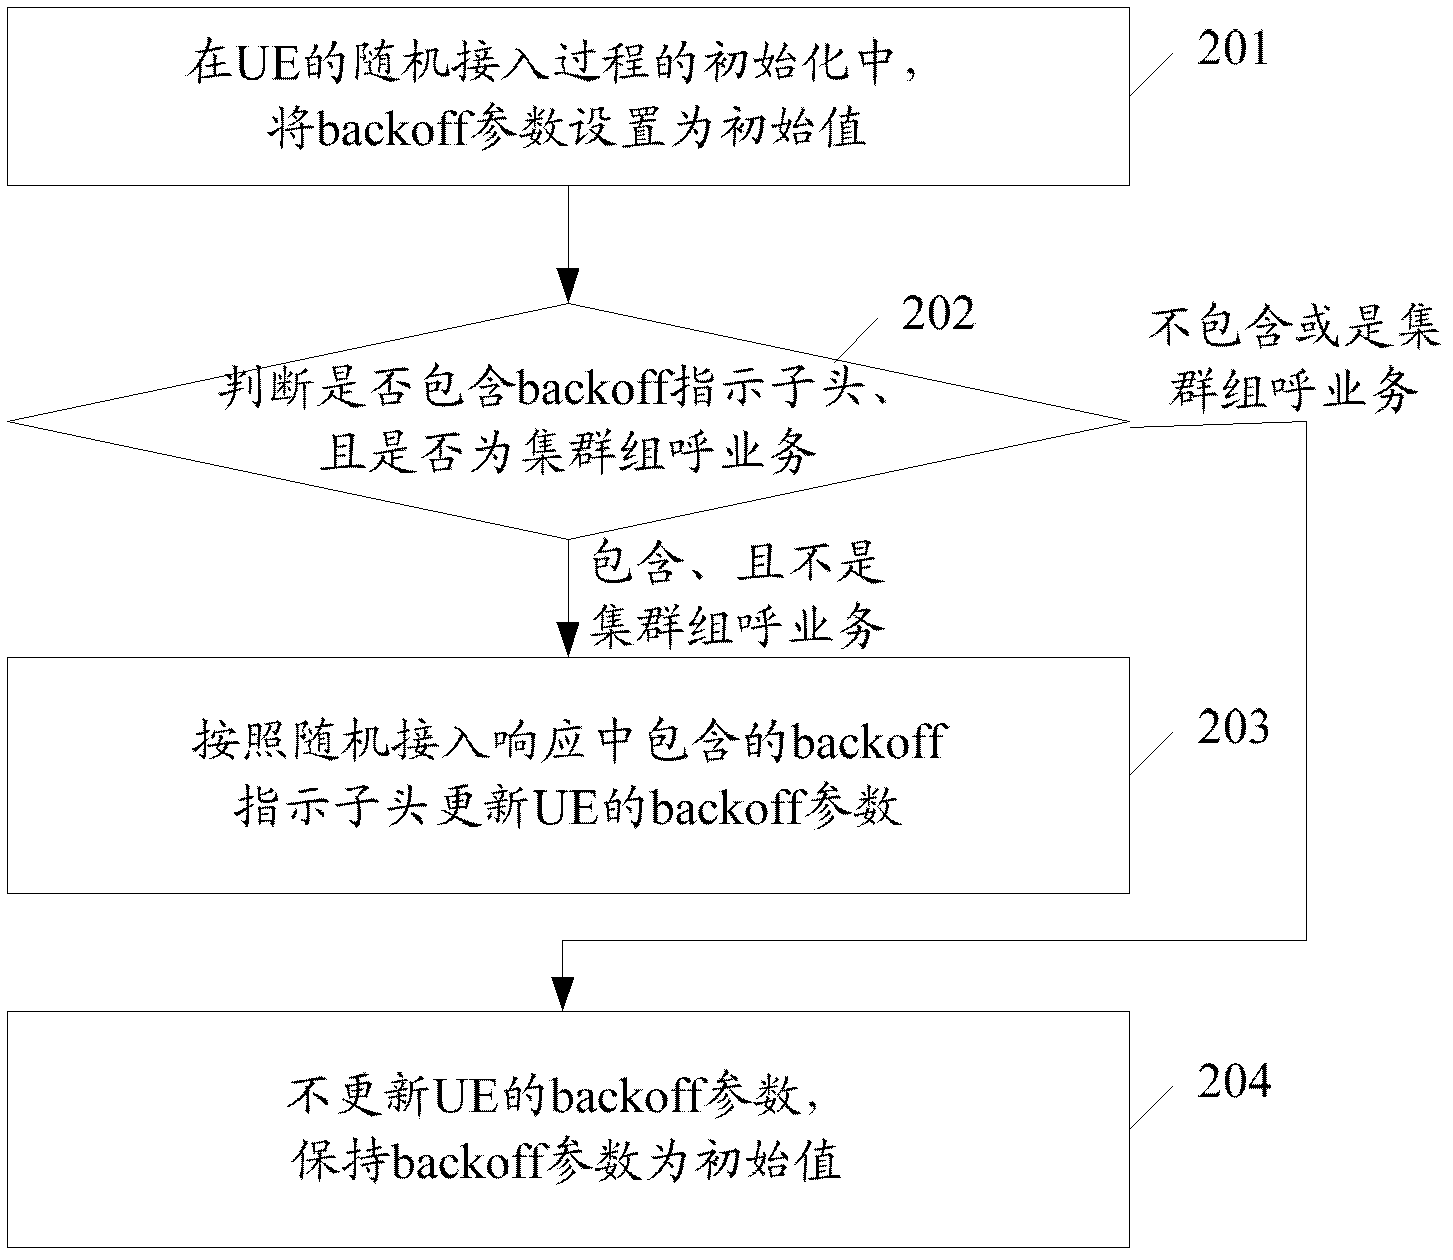 A setting and updating method for backoff parameters in a random access procedure